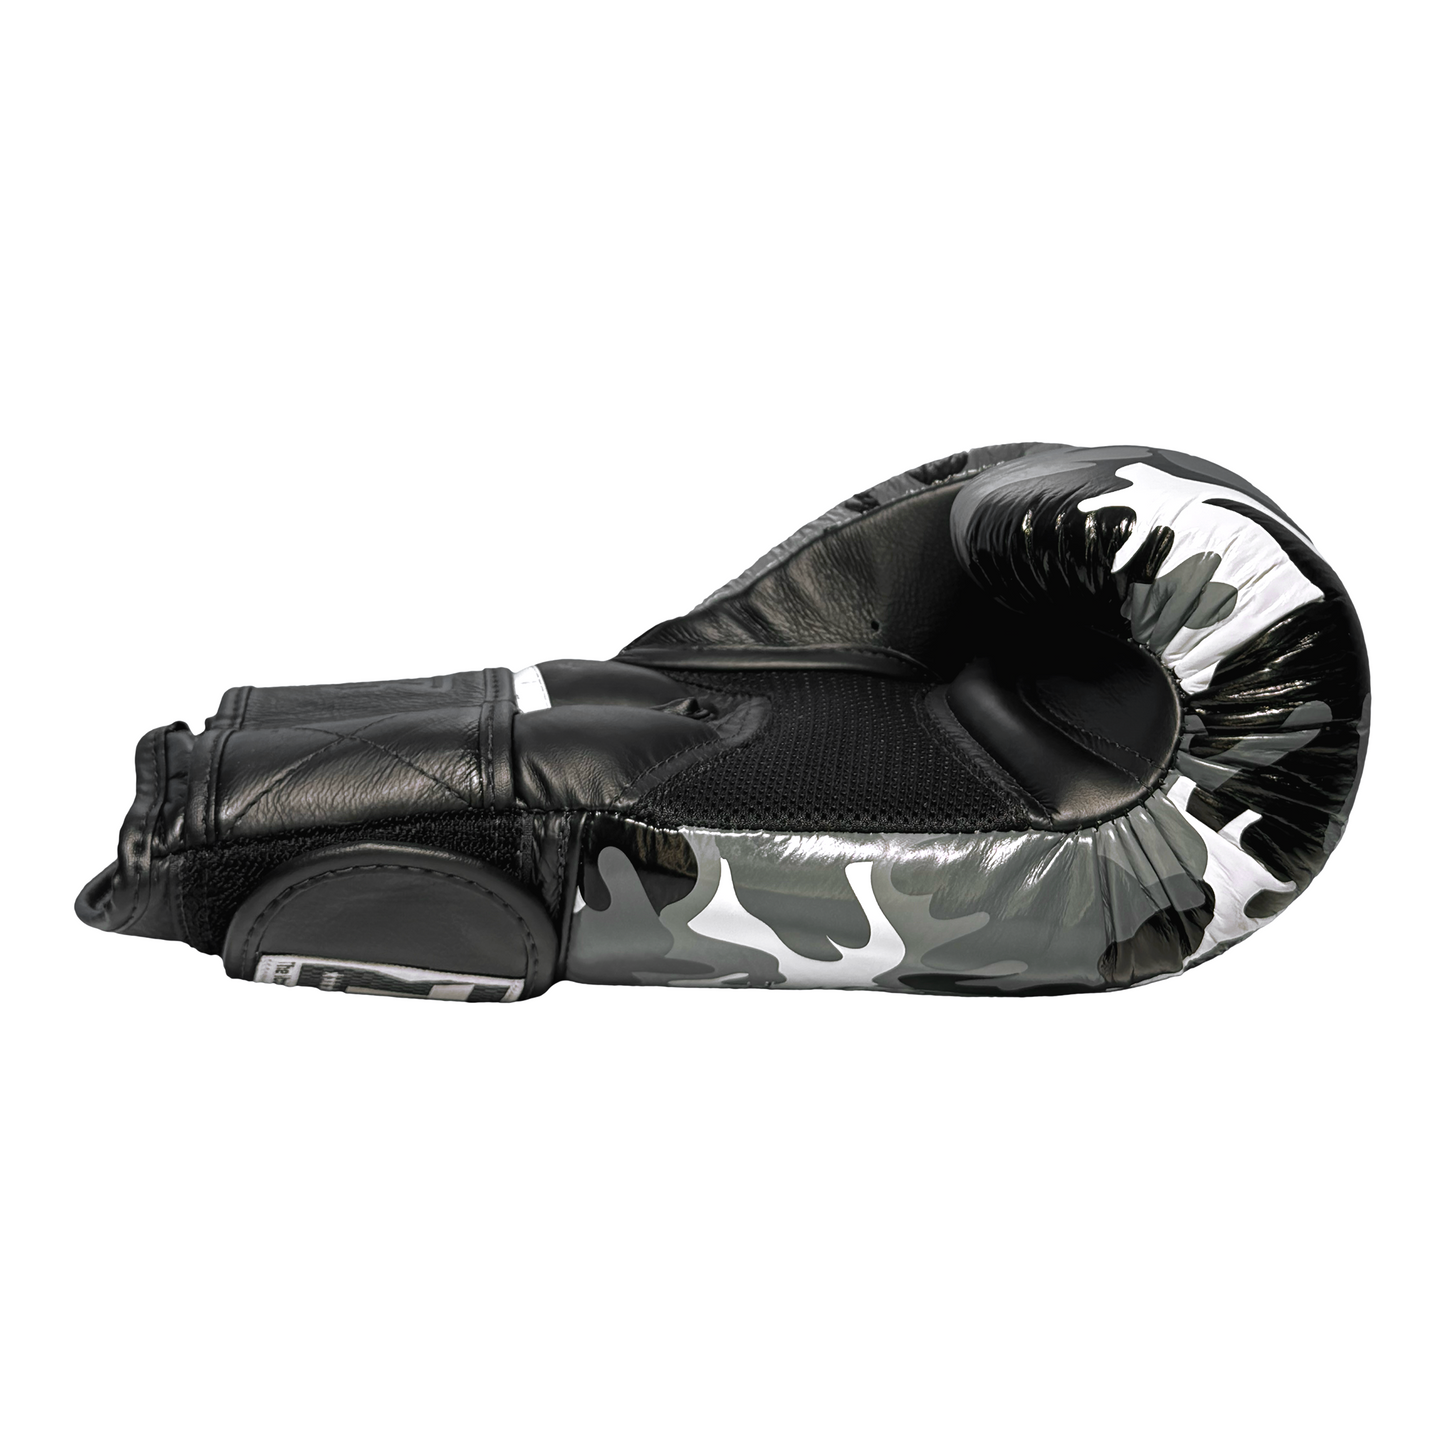 Top King Boxhandschuhe "Empower Camouflage" grau